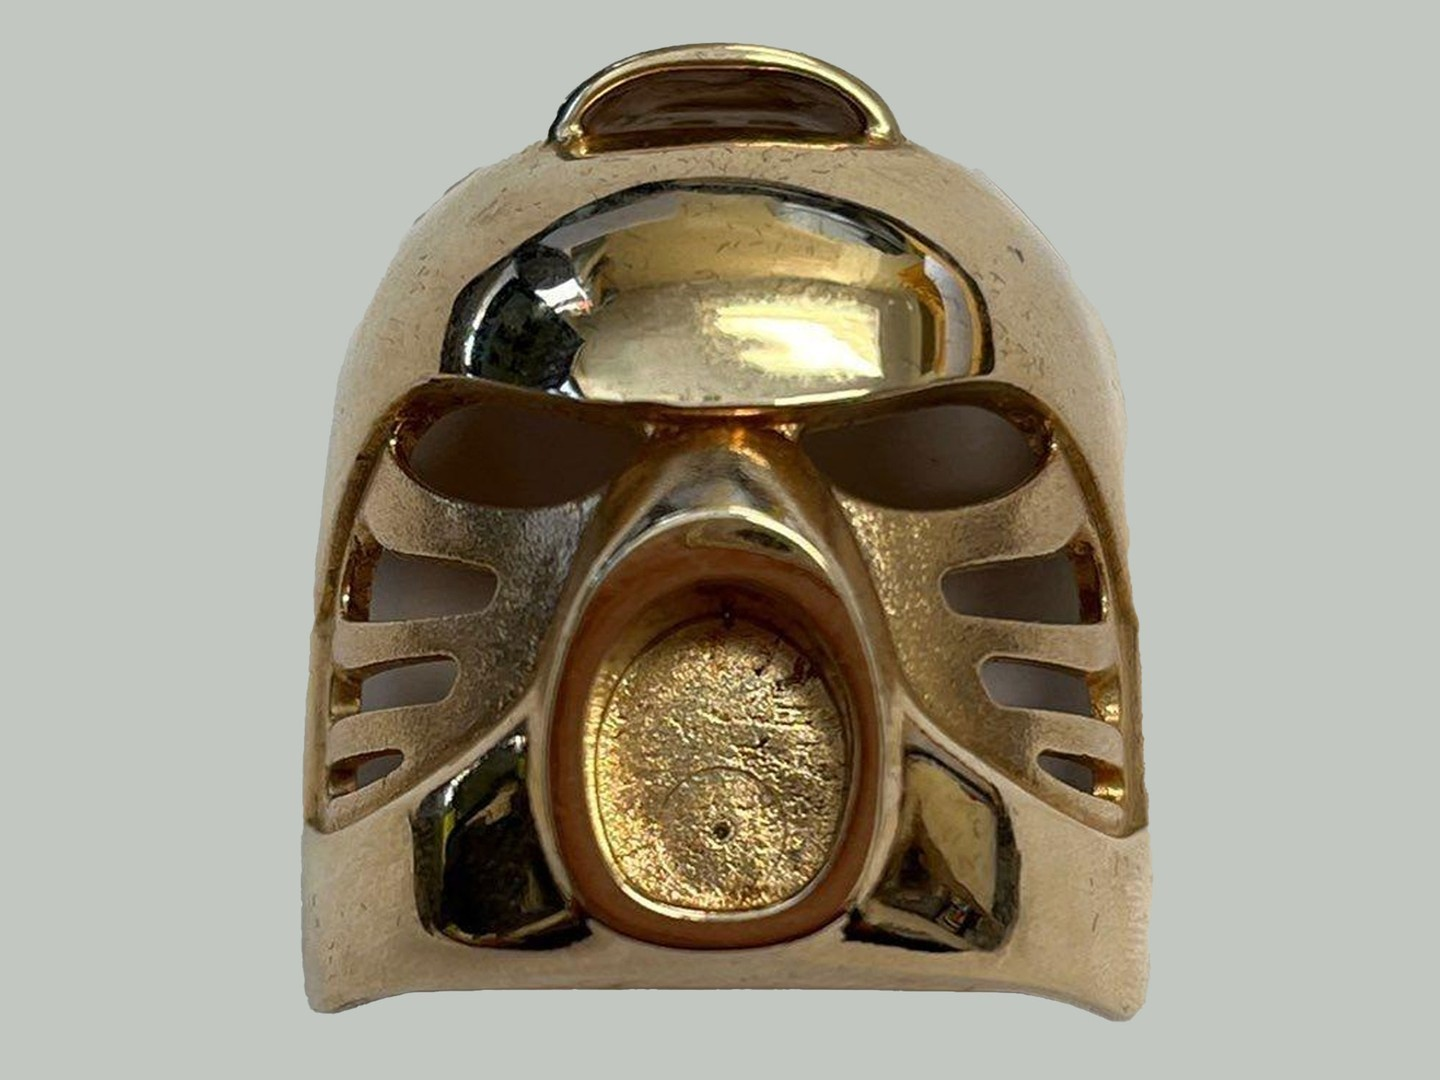 Rare 14-karat gold Kanohi Hau mask from Lego’s now discontinued Bionicle collection (Circa 2000). The item was recently sold for over $18,000 USD at auction.png